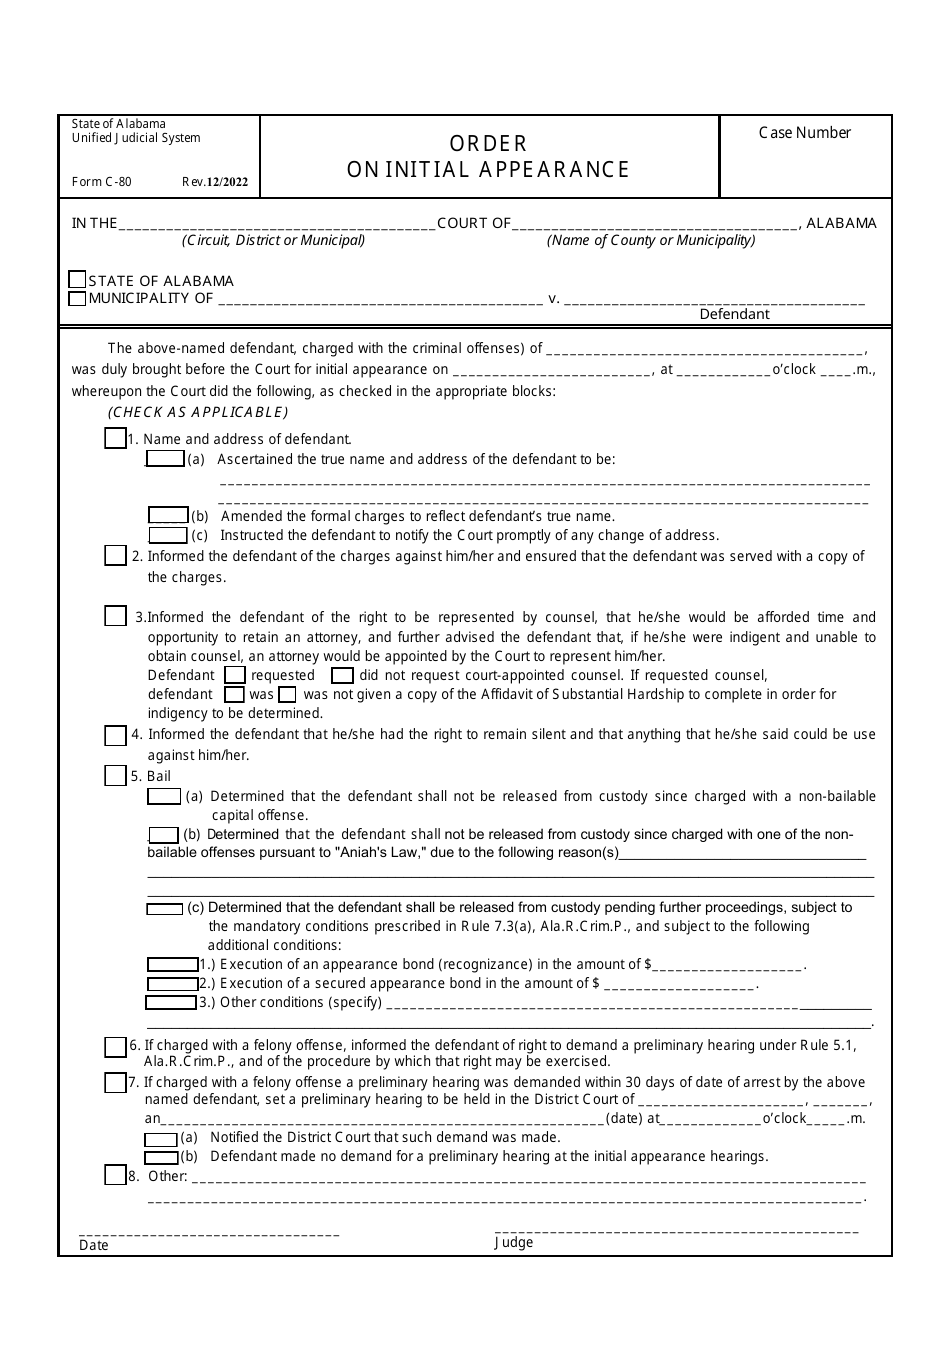 Form C-80 Order on Initial Appearance - Alabama, Page 1